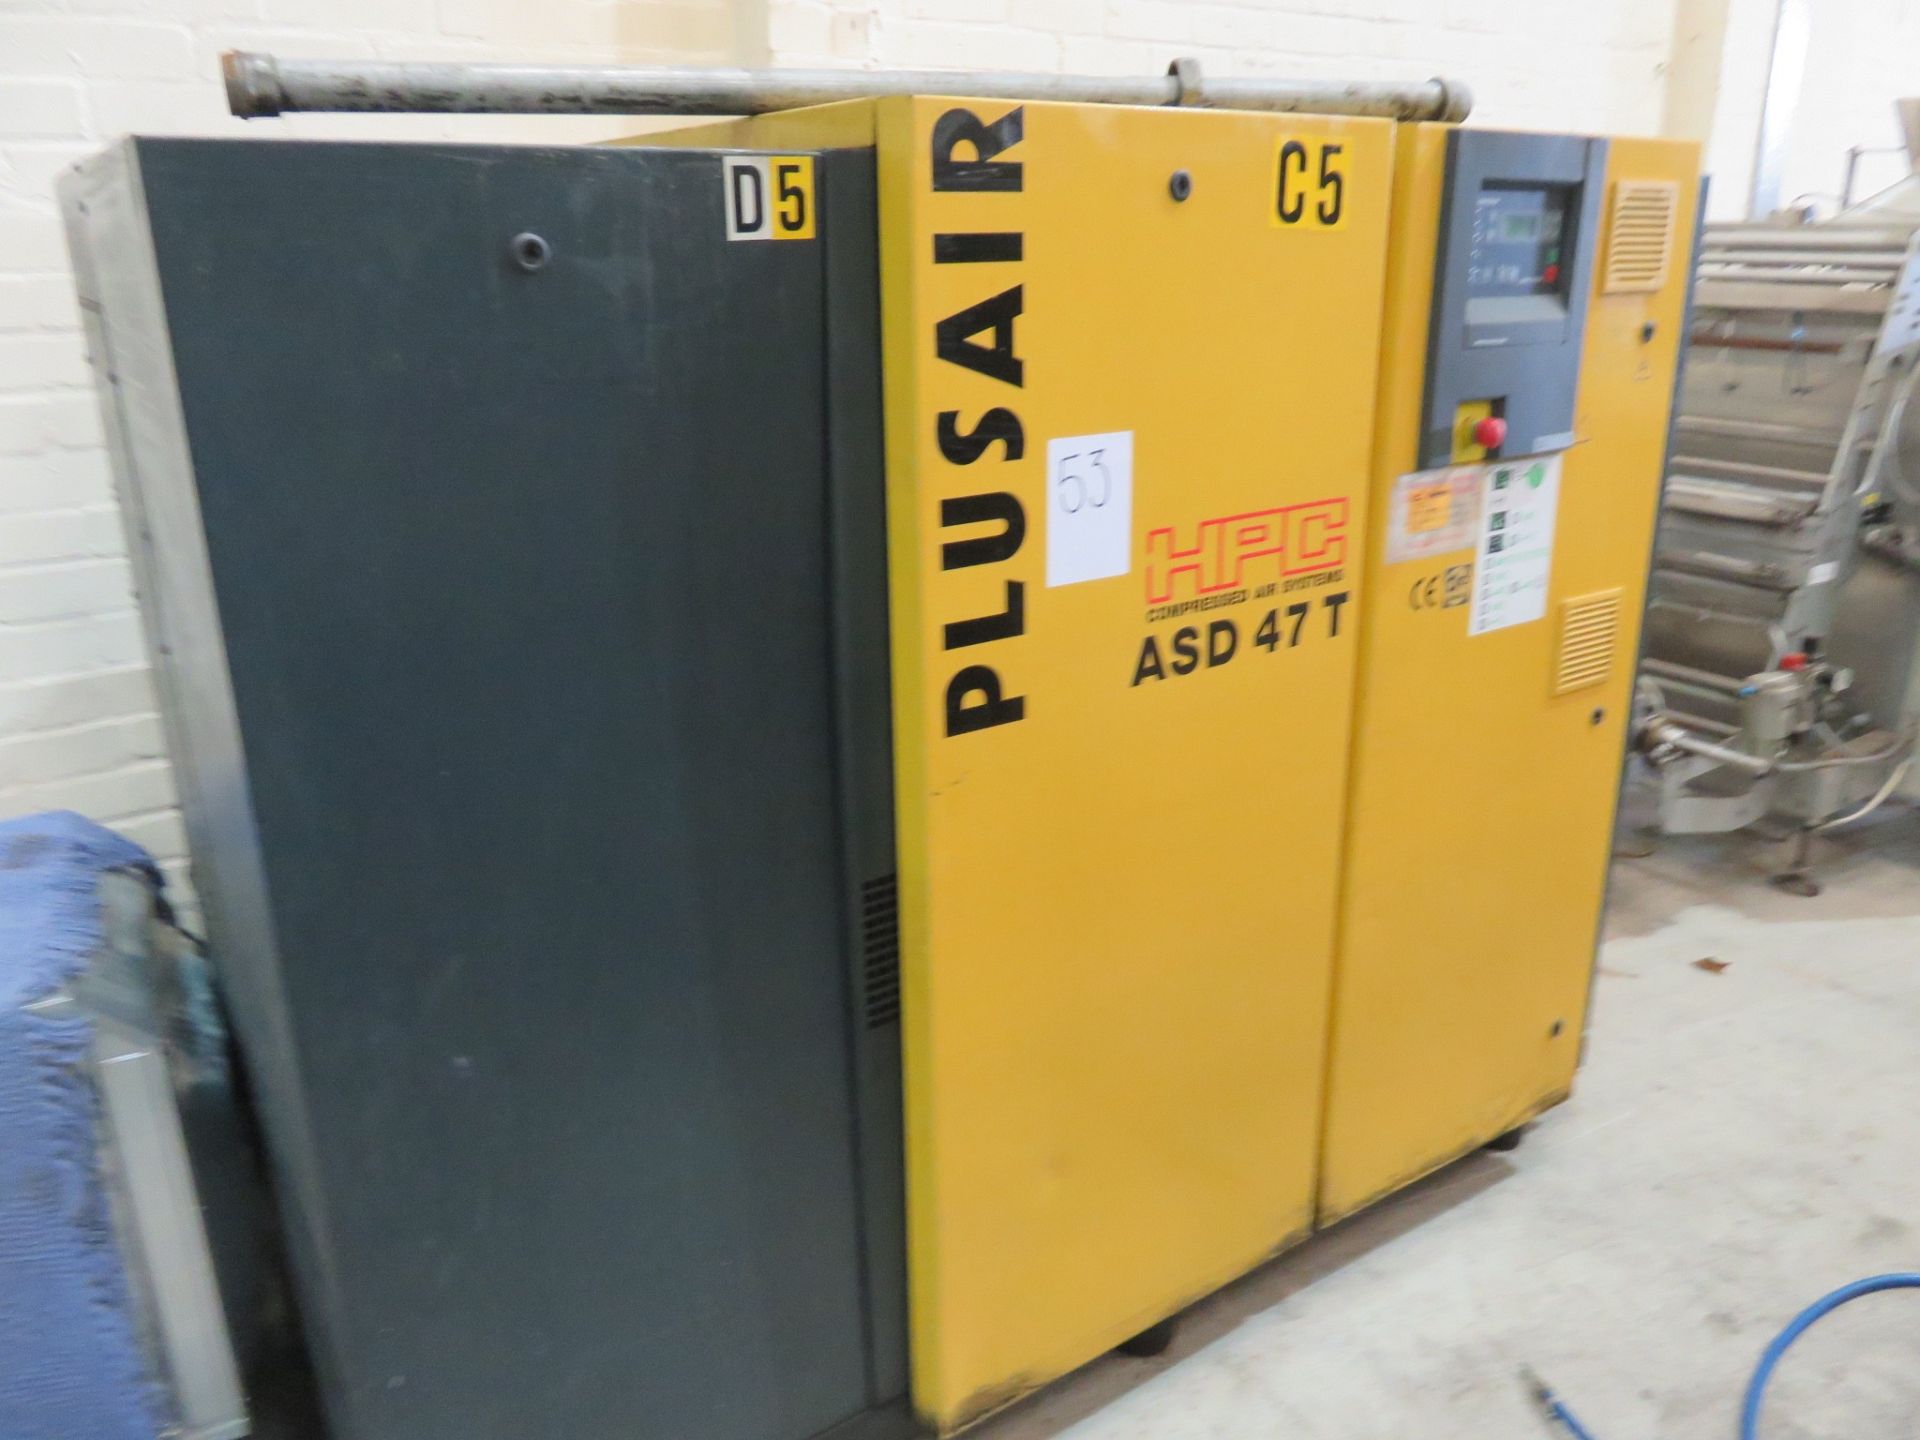 Pulsair HPC Compressor. Air System. Type ASD 47T. Sigma control. SN 1705. Rated power 25.0kw Motor - Image 3 of 3